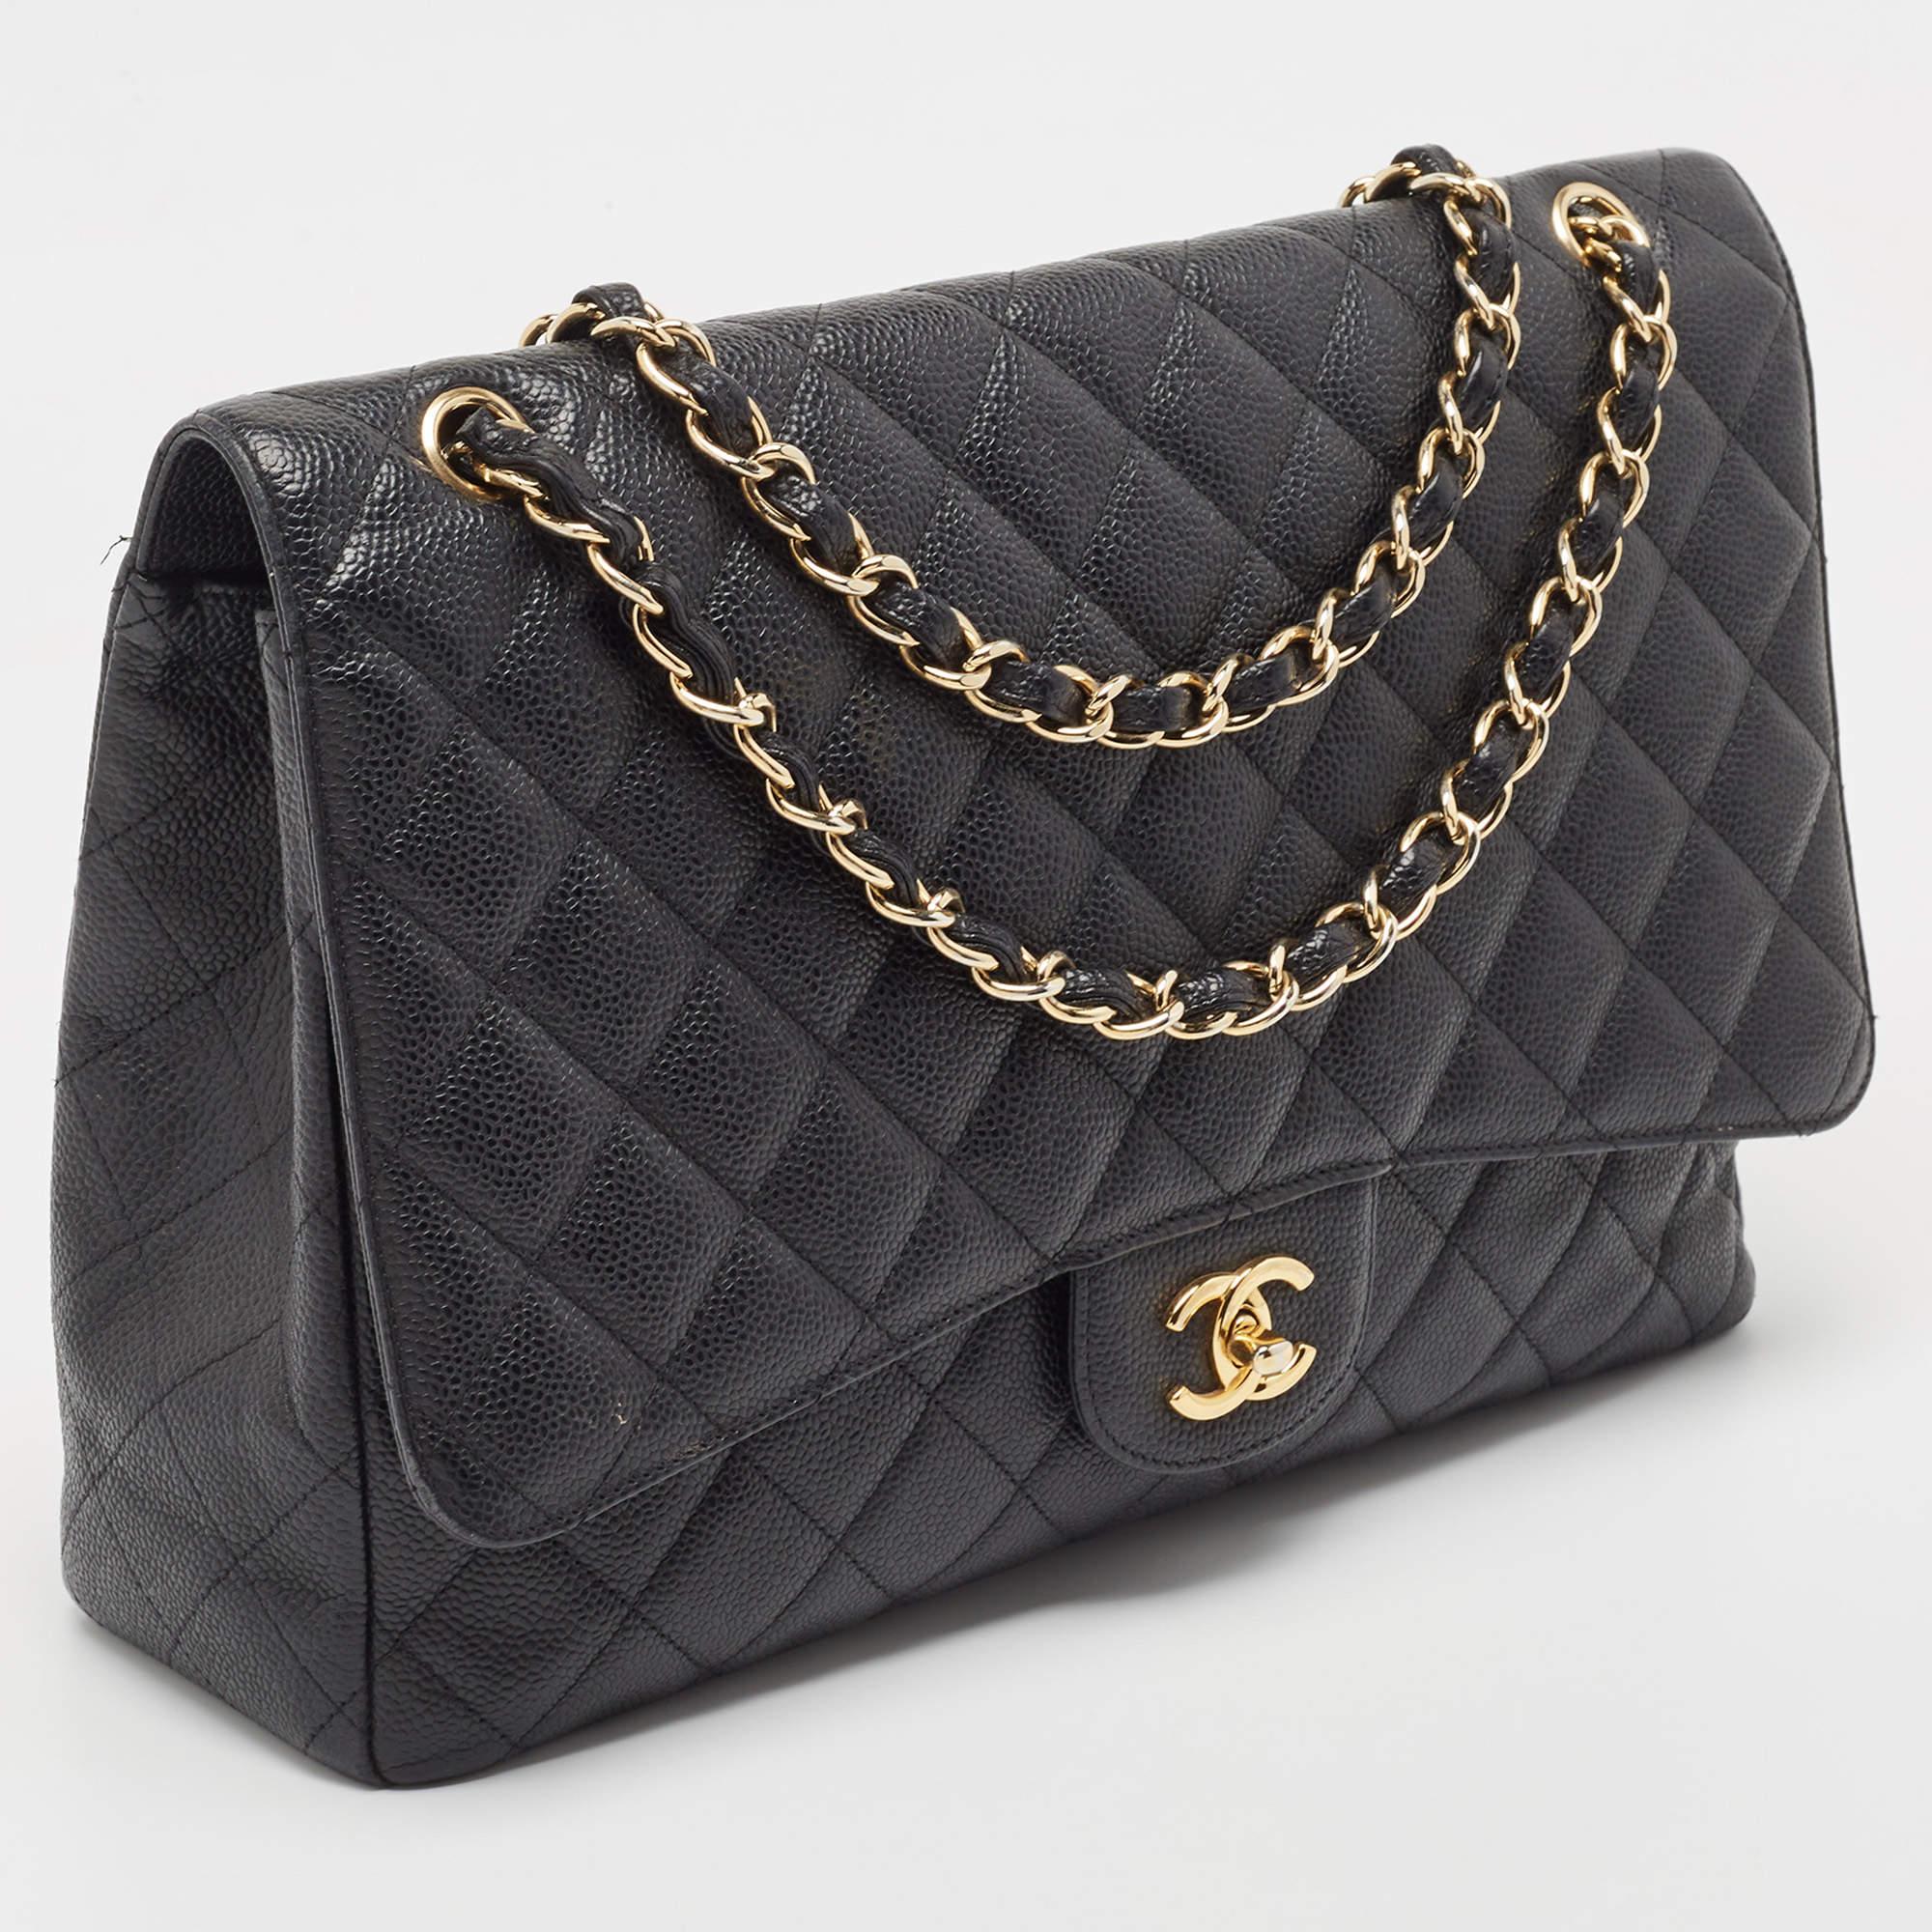 Chanel Black Quilted Caviar Leather Maxi Classic Single Flap Bag 10